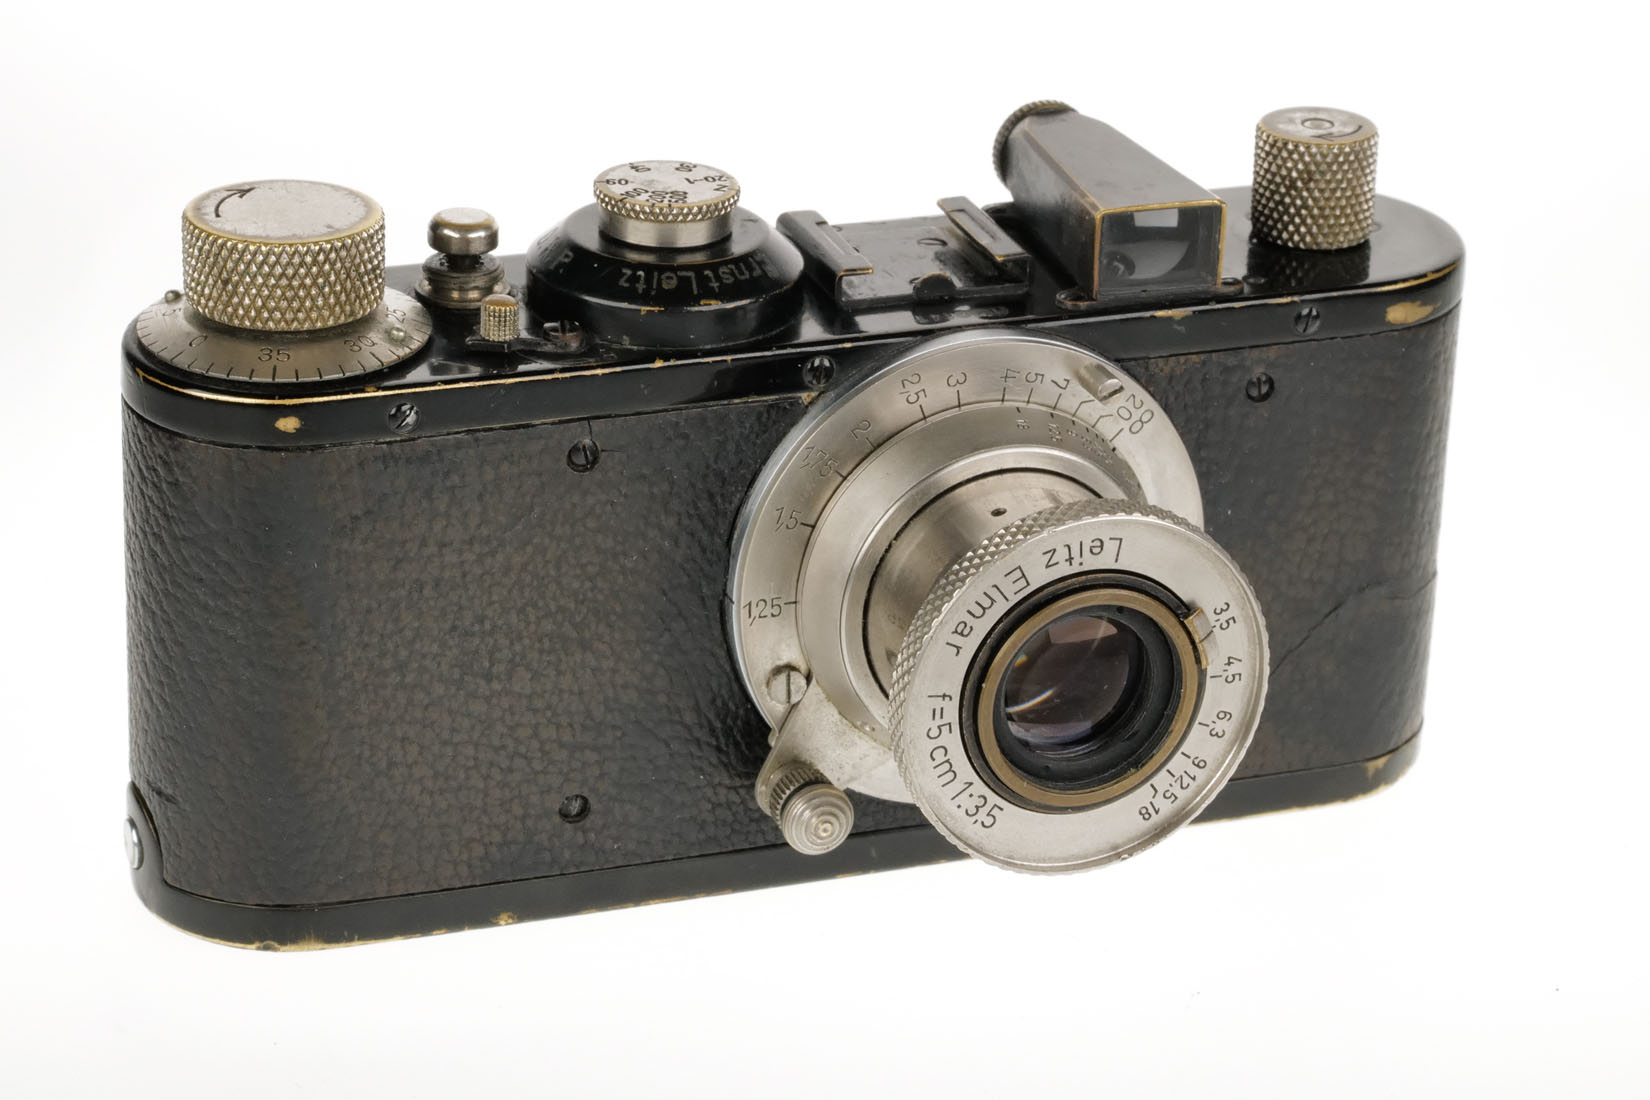 Leica I conversion to Standard